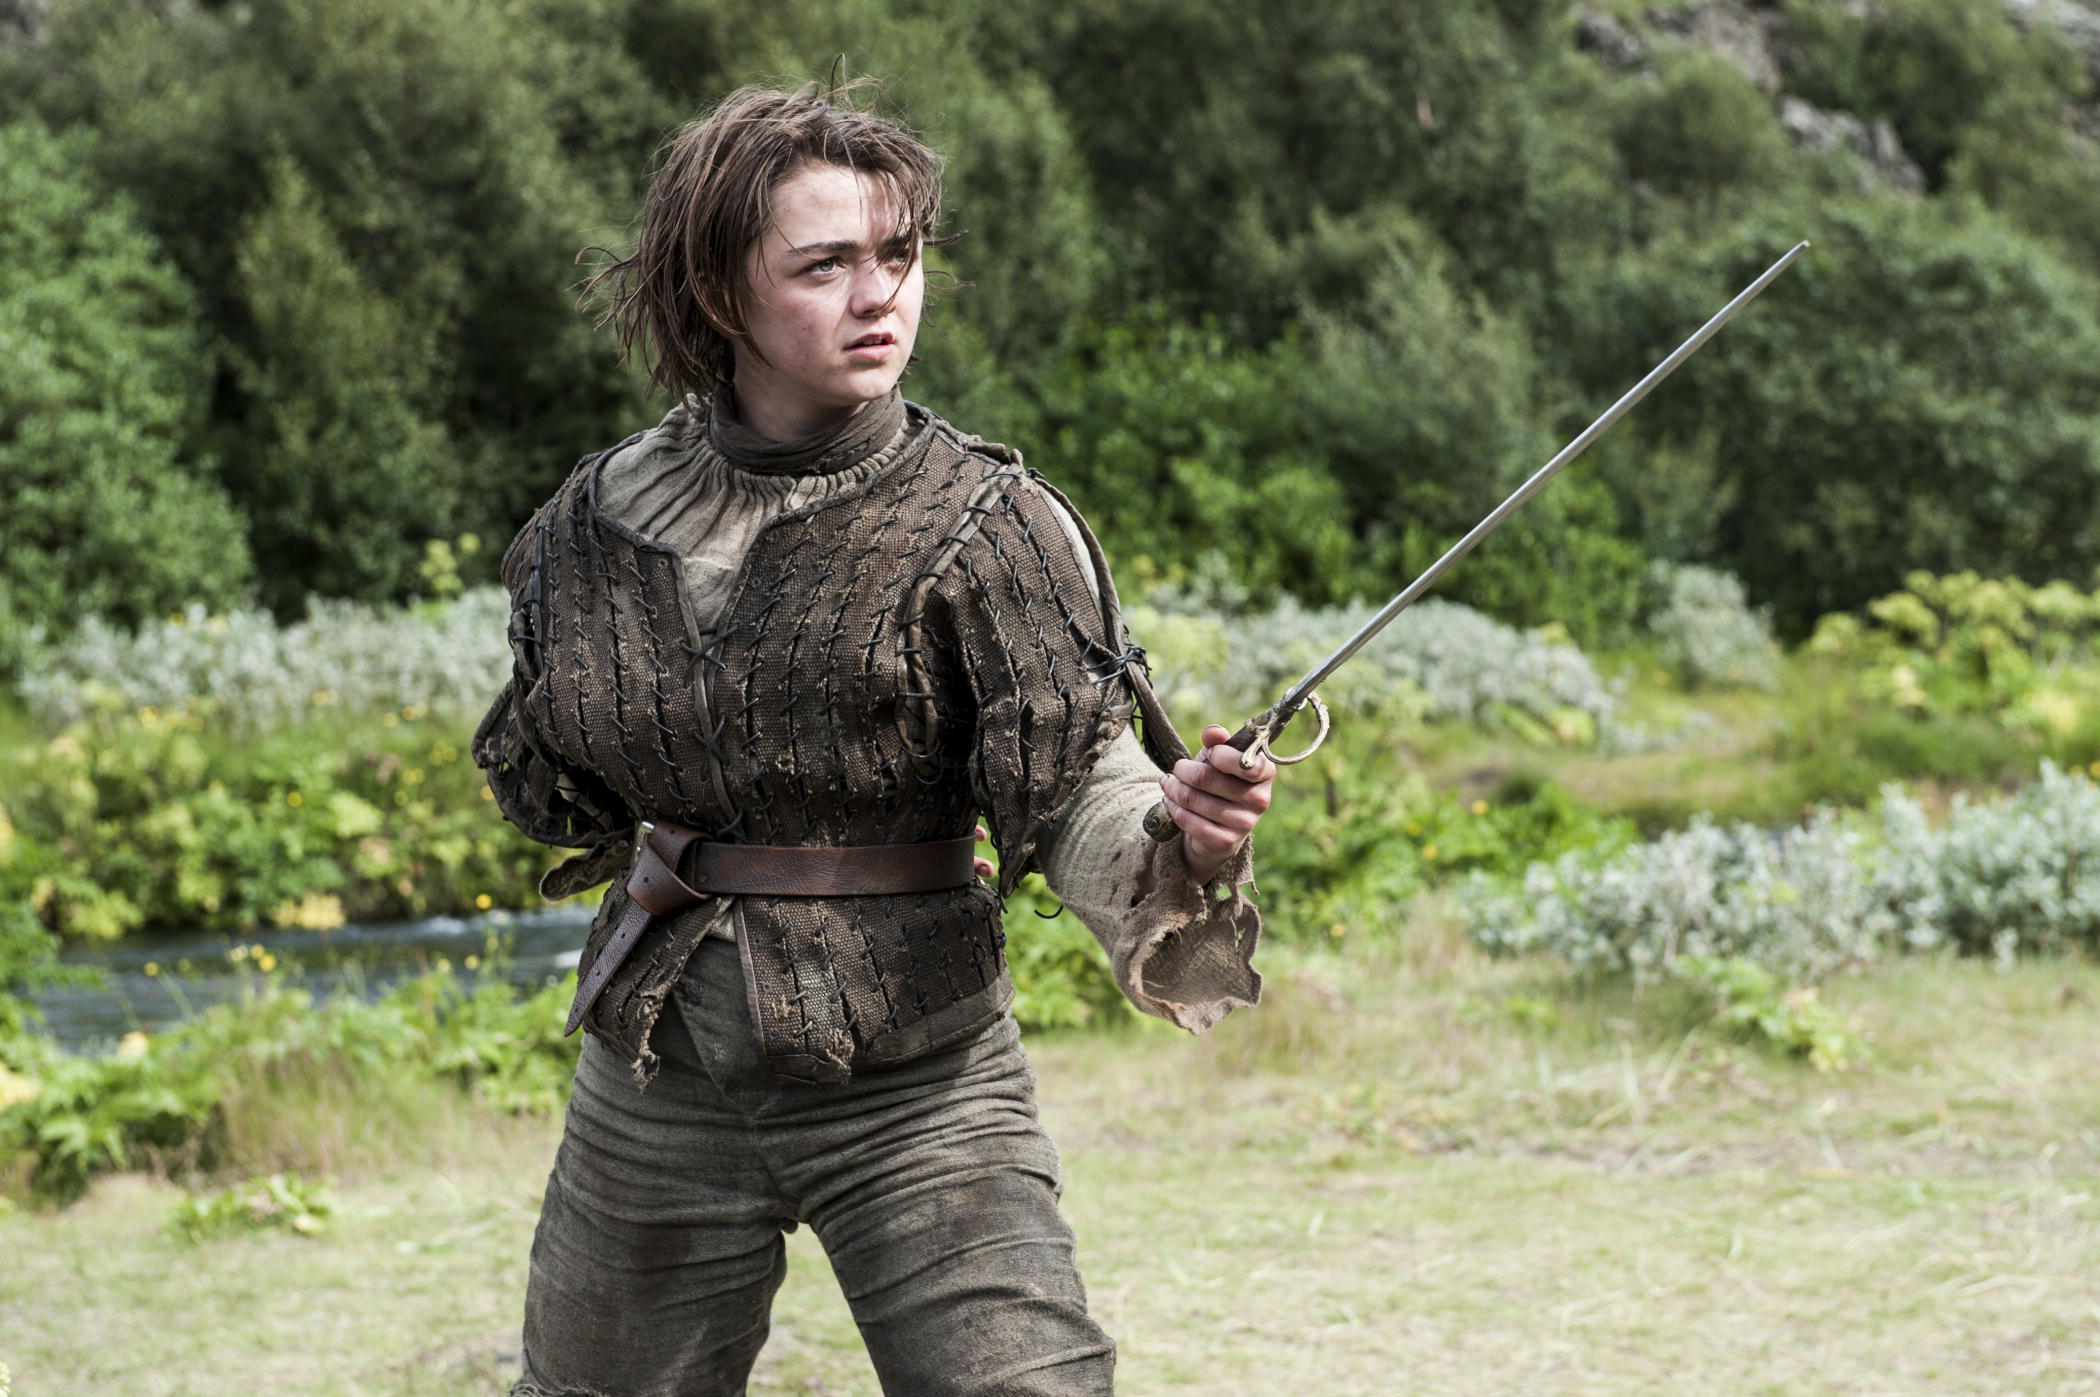 Let’s Talk About the Children: War and the Loss of Innocence on ‘Game of Thrones’